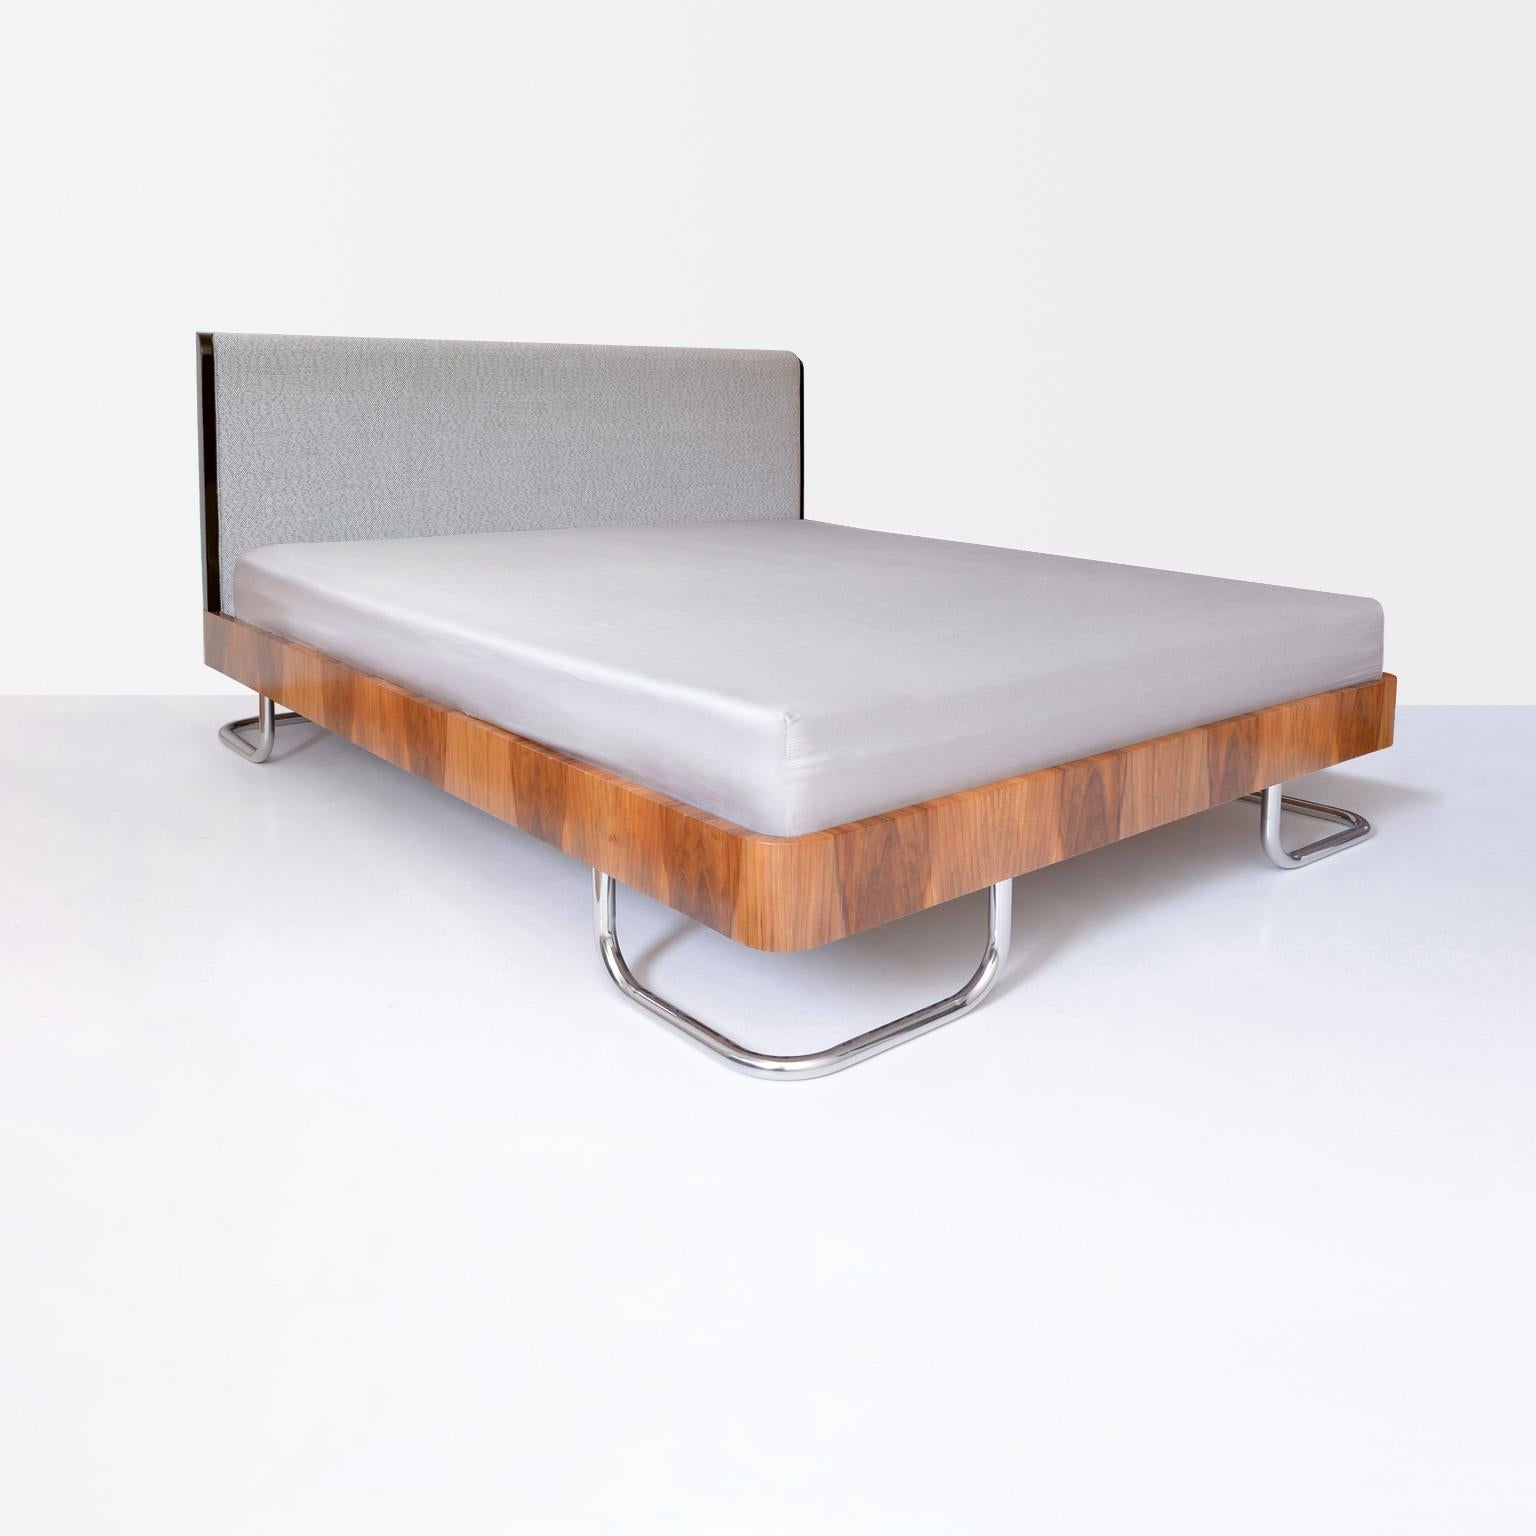 Modern contemporary customizable double bed in handcrafted wood, manufactured by GMD Berlin, Germany, 2018

The mattress and slated frame are not included.
Delivery time: 6-7 weeks.